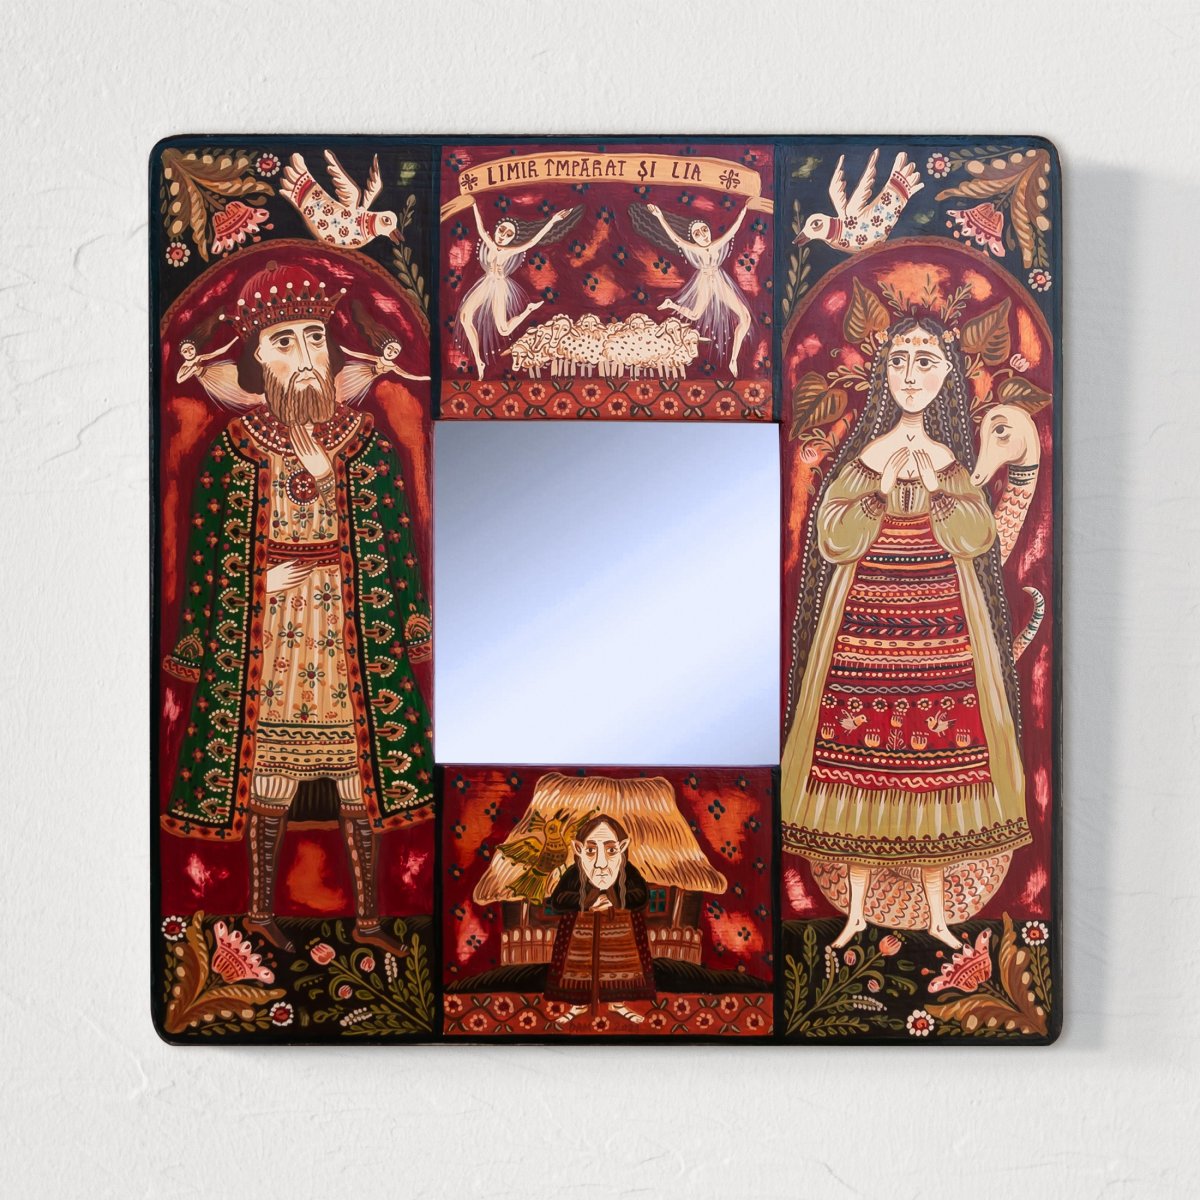 Painting on wood with mirror, "Emperor Limir and Lia", 23x23 cm